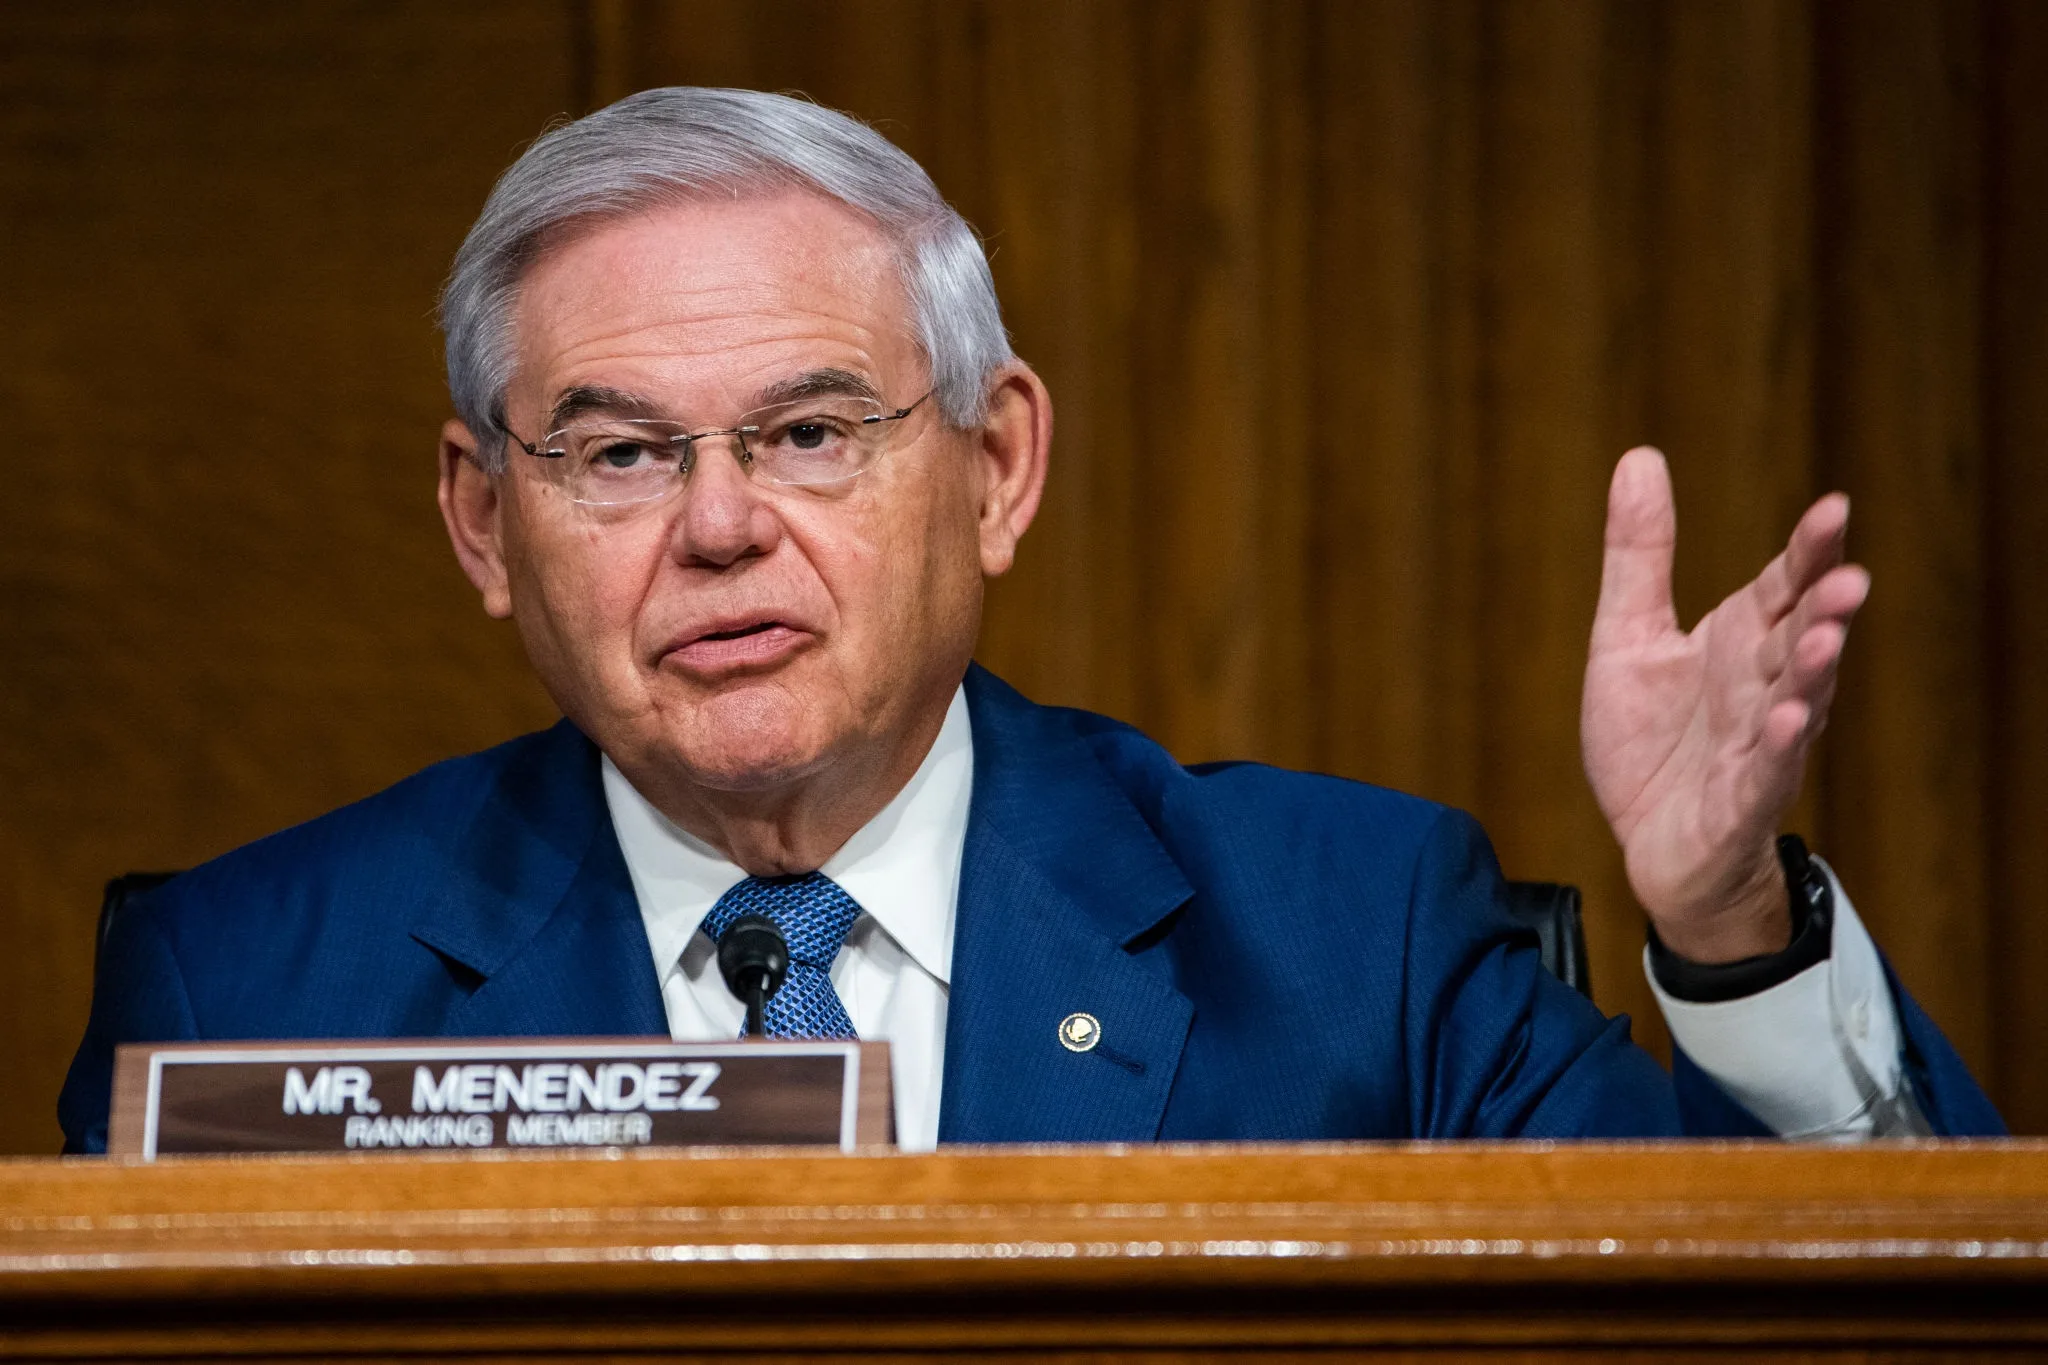 US Senator Robert Menendez and his spouse indicted for corruption allegations (US POLL 2024)